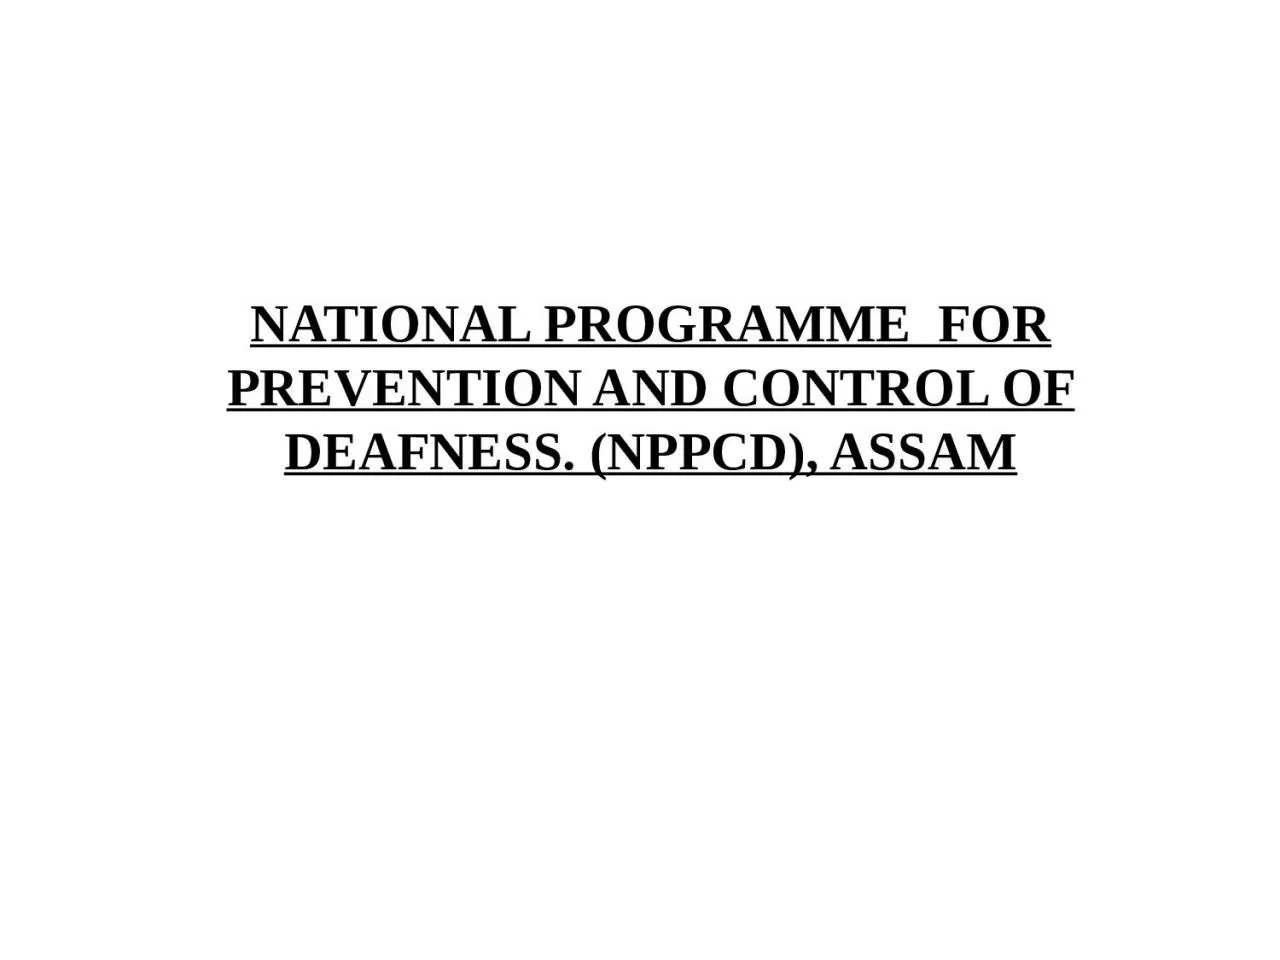 NATIONAL PROGRAMME  FOR PREVENTION AND CONTROL OF DEAFNESS. (NPPCD), ASSAM